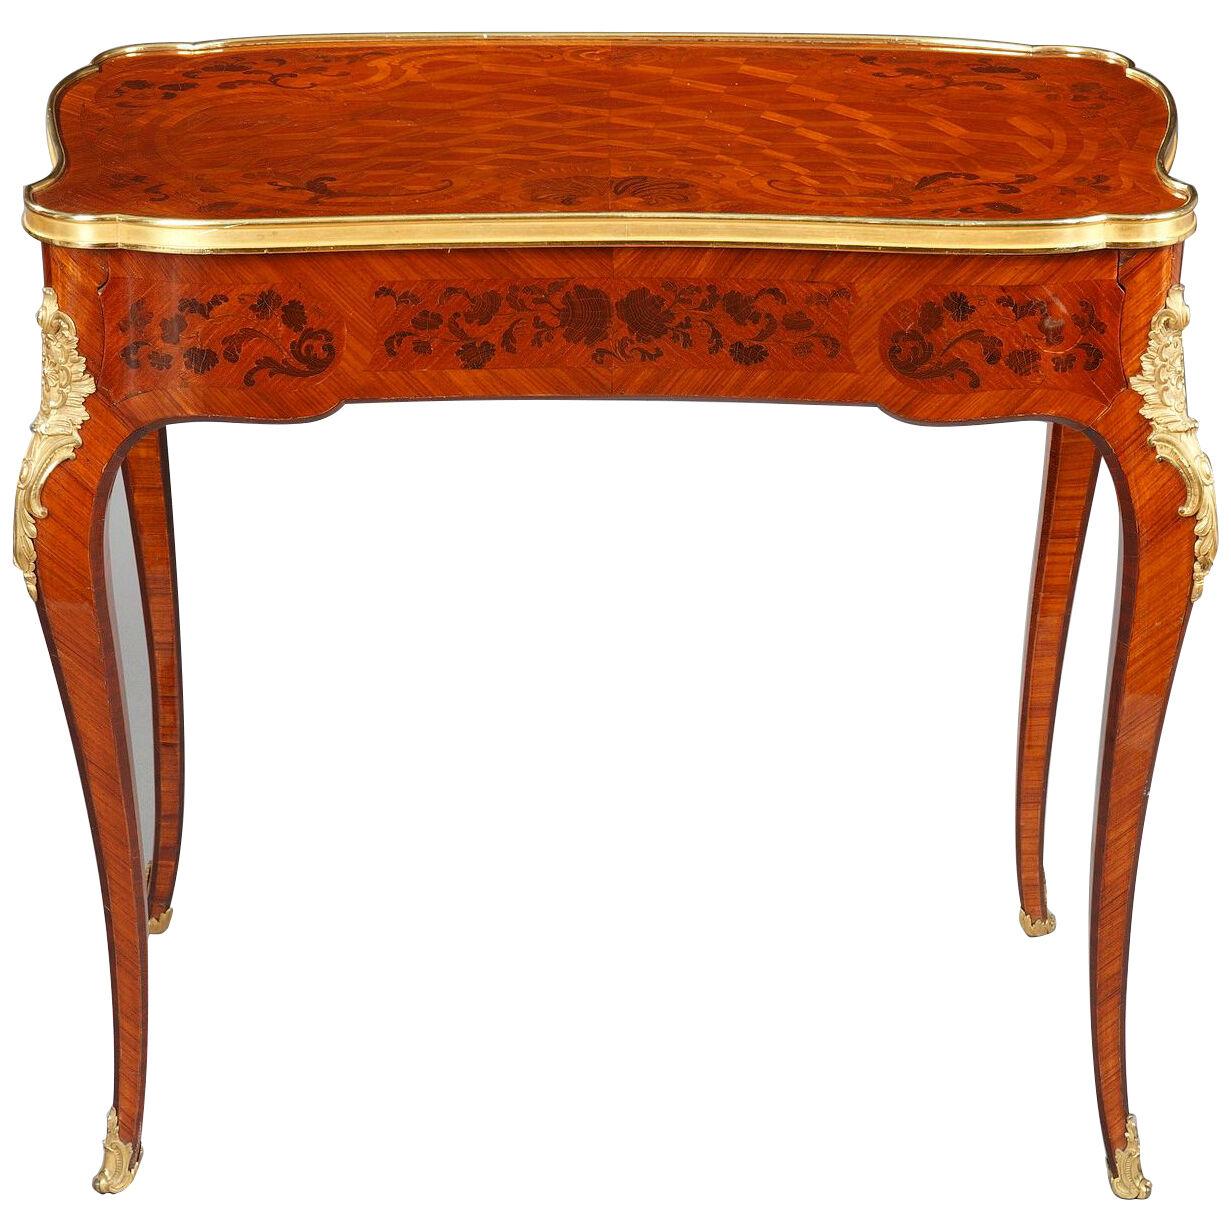 Louis XV Style Wood Marquetry Table Attributed to G. Durand, France, Circa 1880